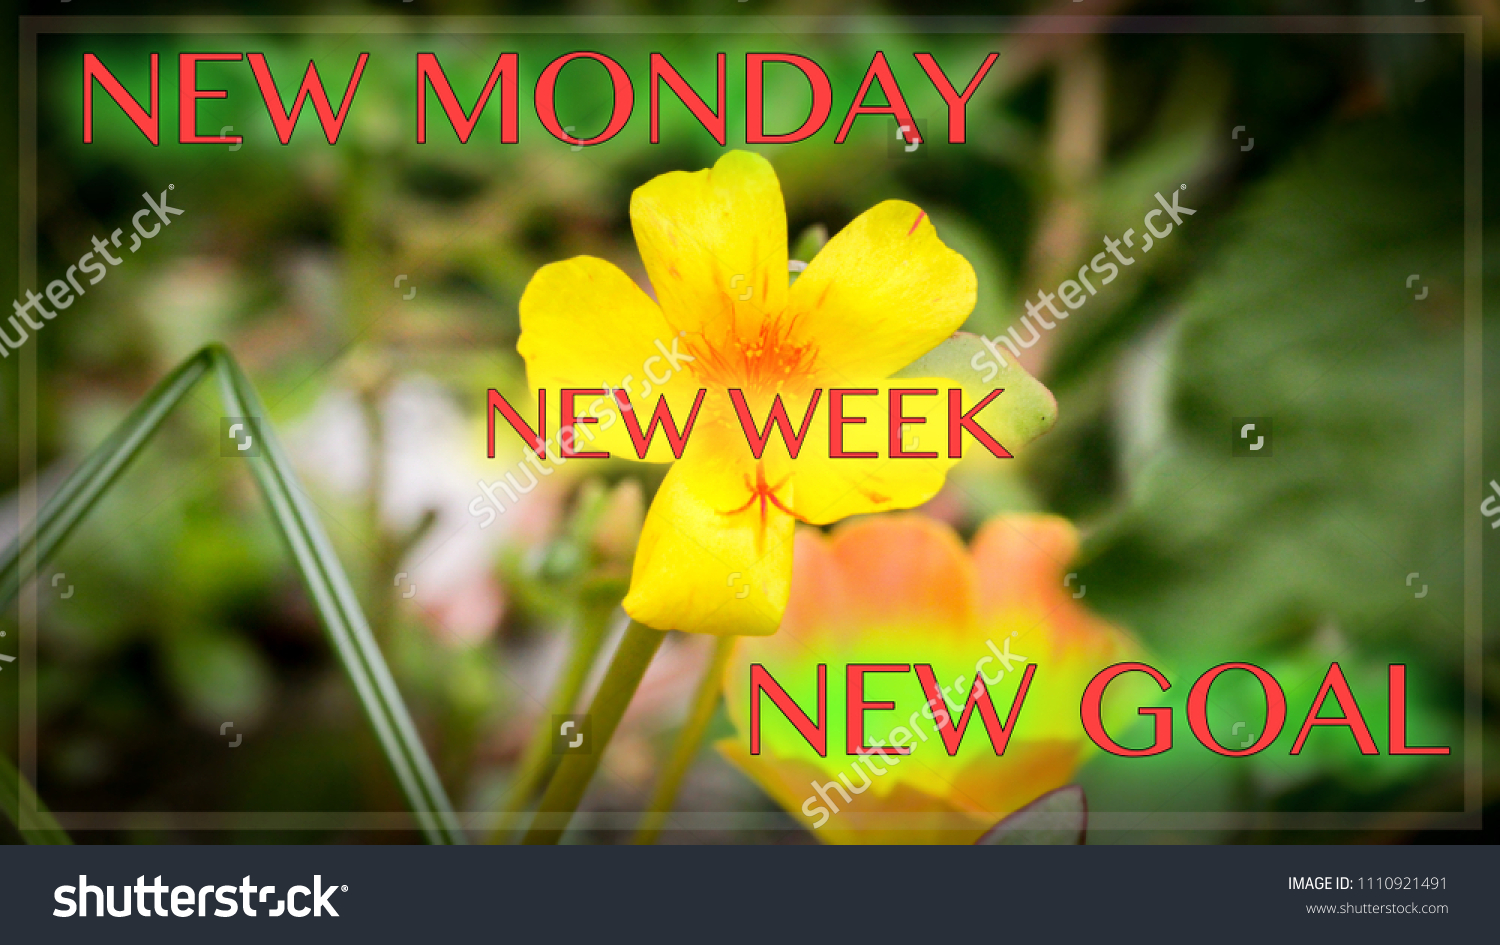 Motivational Inspirational Quotes New Monday New Week New Goal Stock